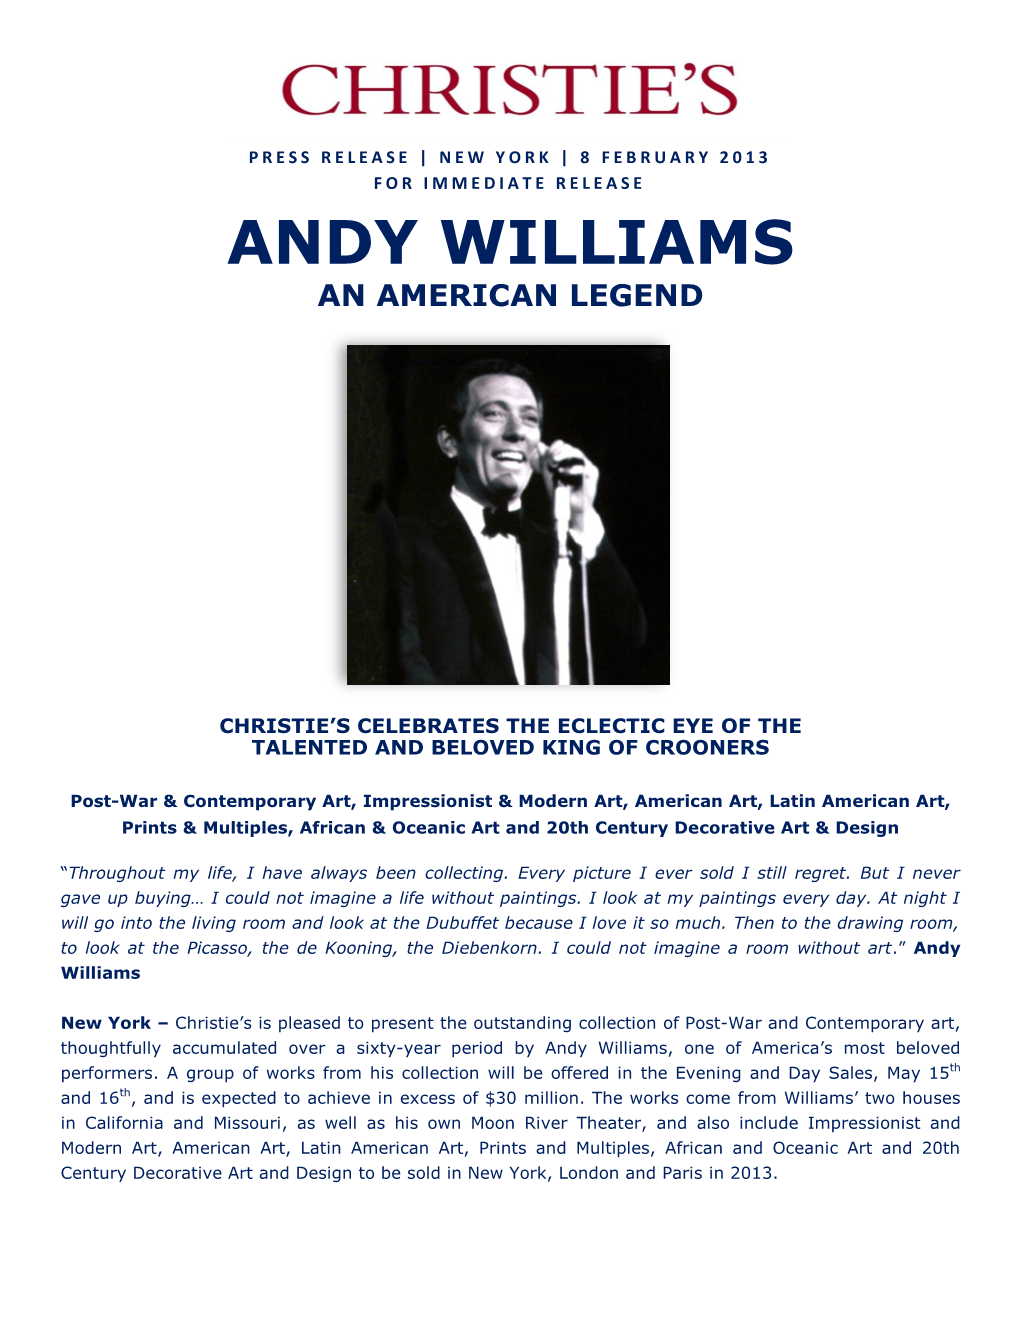 Andy Williams an American Legend